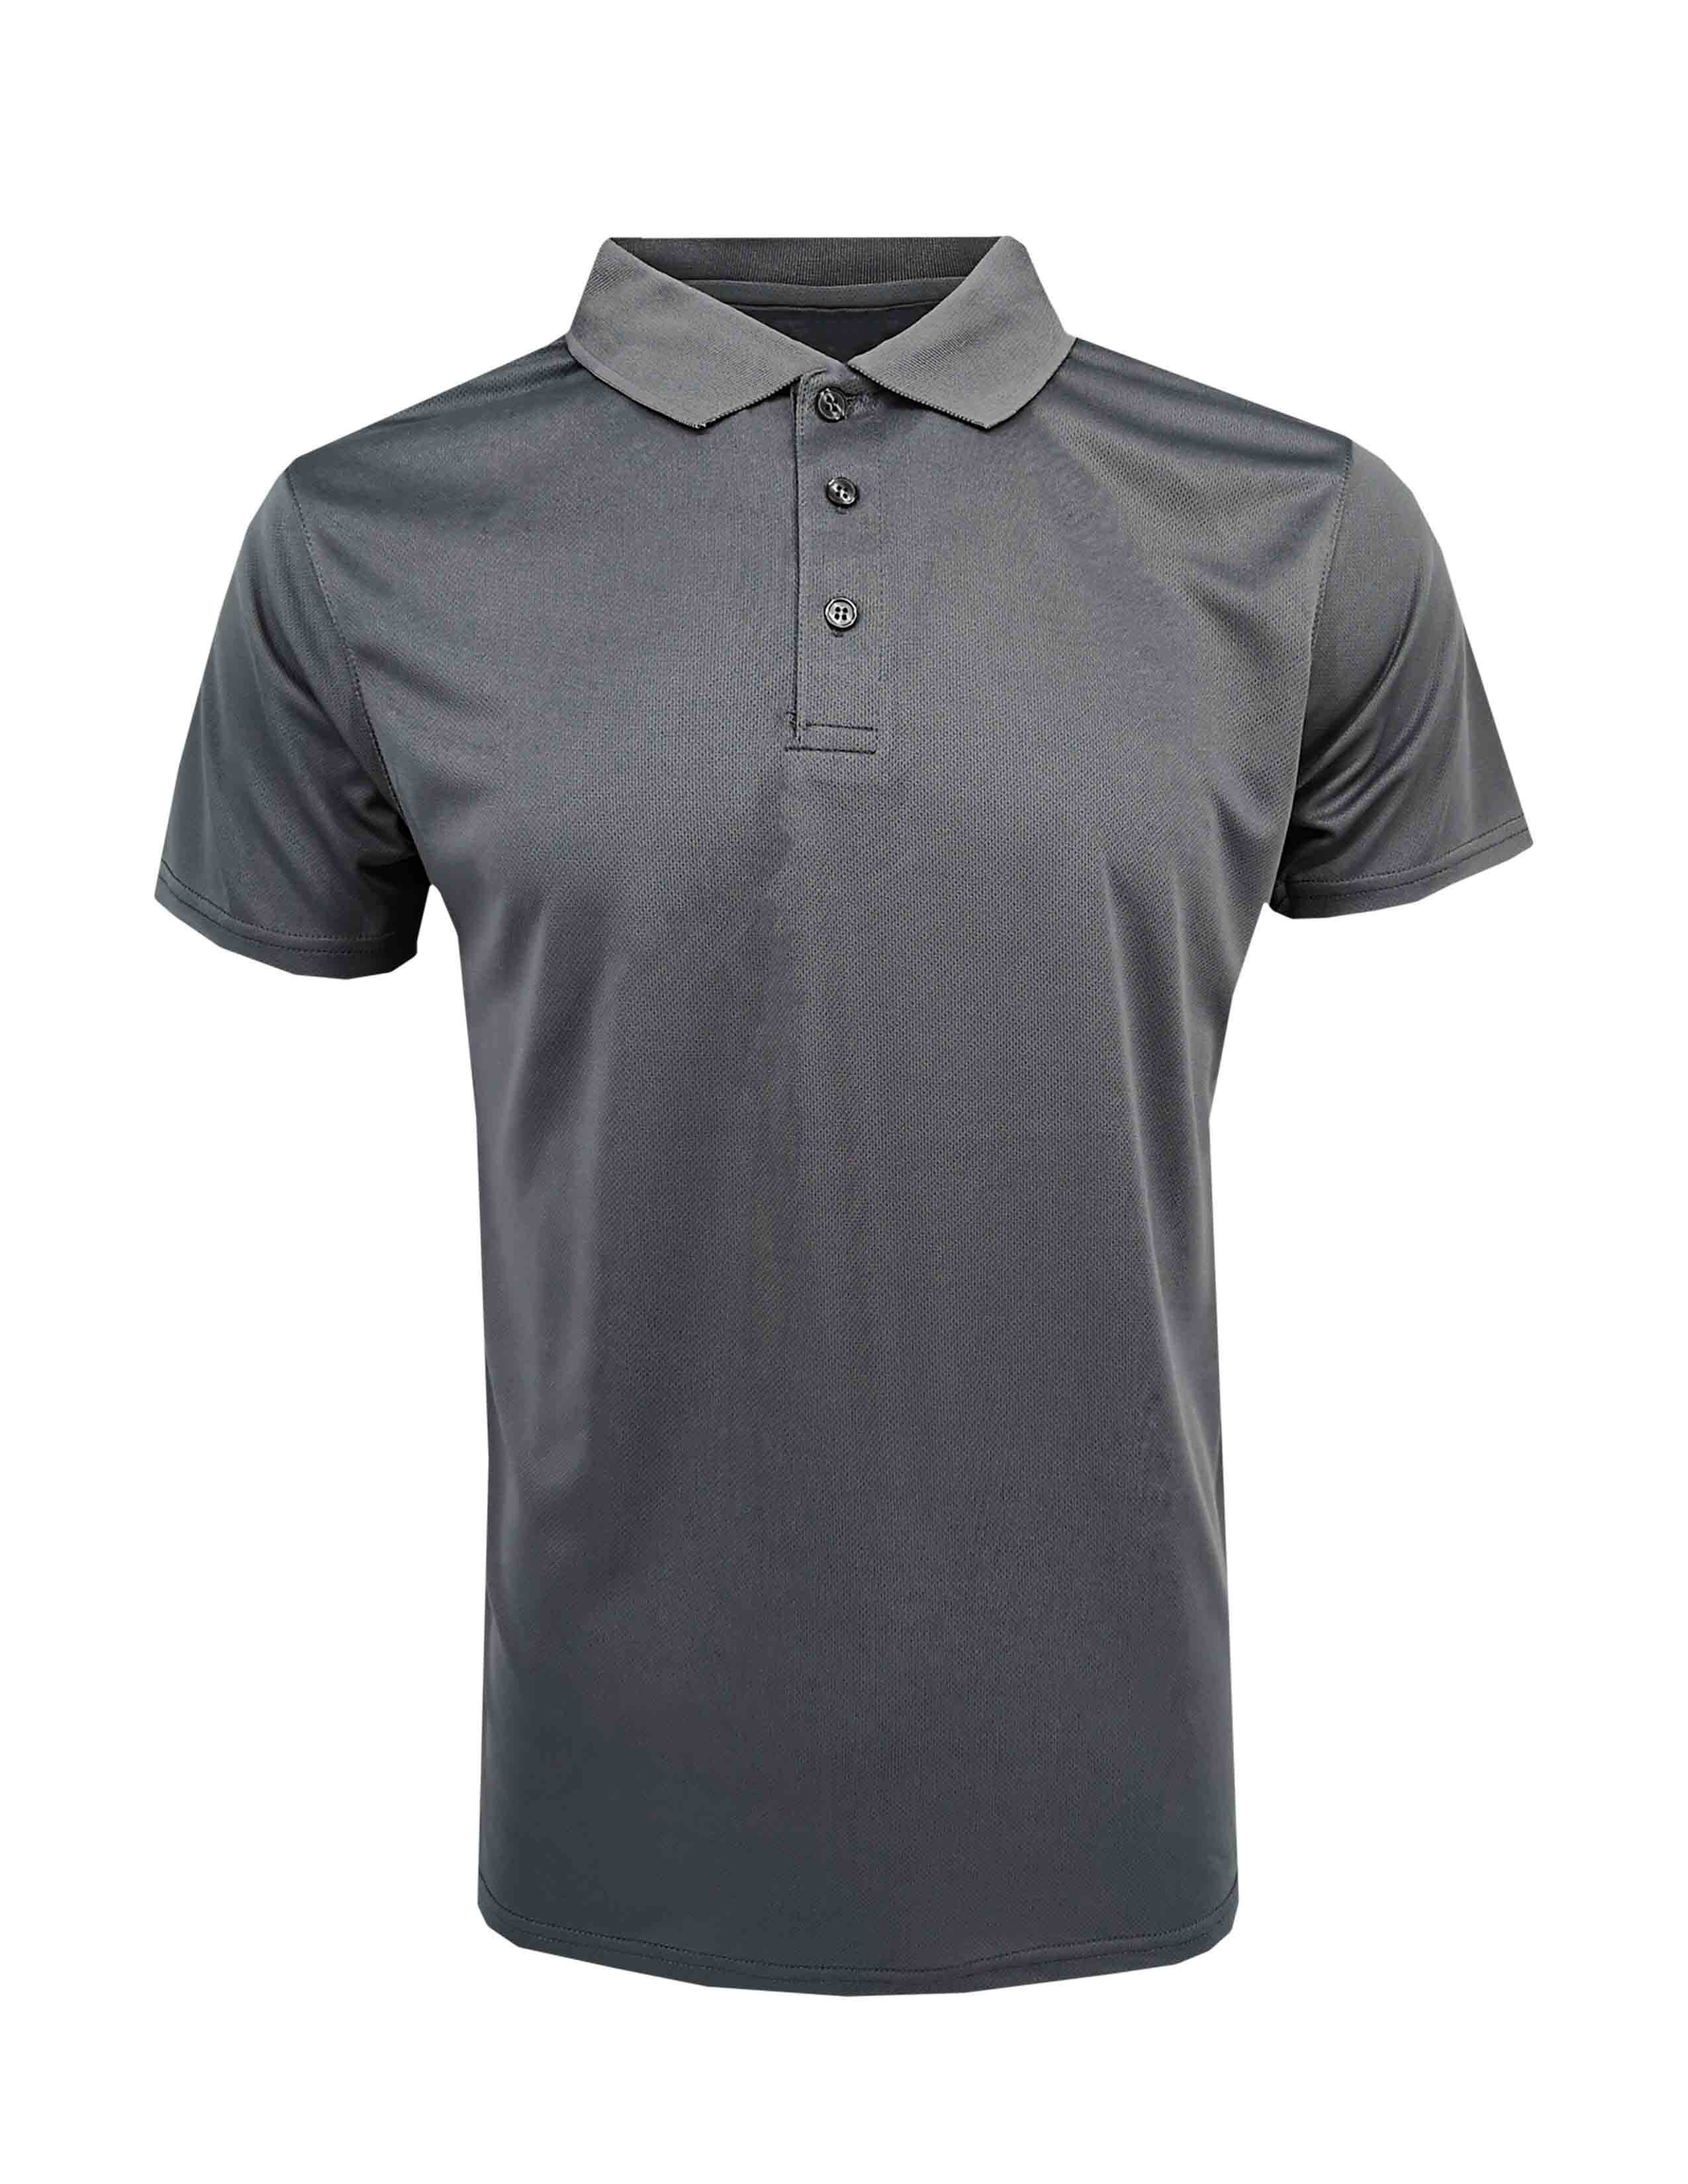 RIGHTWAY Quick Dry Polo Small Size 2XS-XS Unisex Men Women Grey Mable Button Plain Mini Mesh Microfiber Active Polo QDP53 Full Color Available